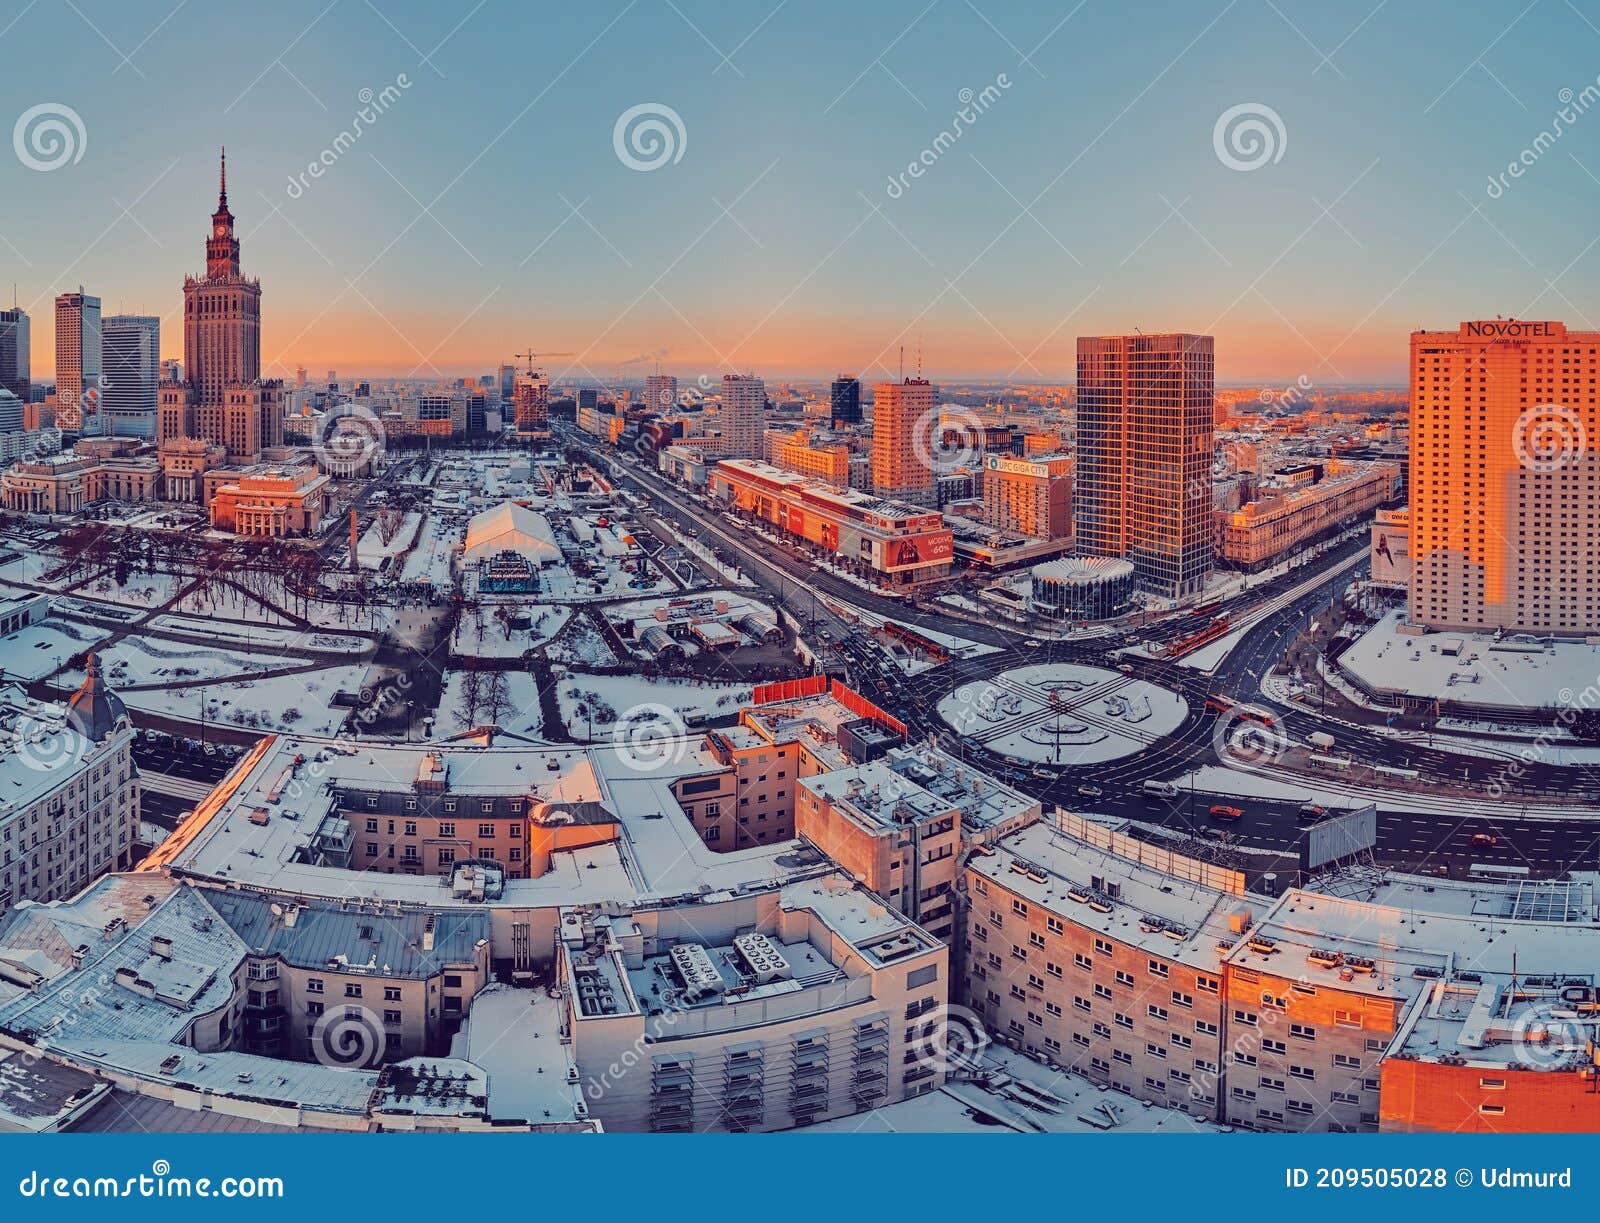 warsaw, poland - january 31, 2021: beautiful panoramic aerial drone view on warsaw city skyscrapers, pkin, and varso tower under